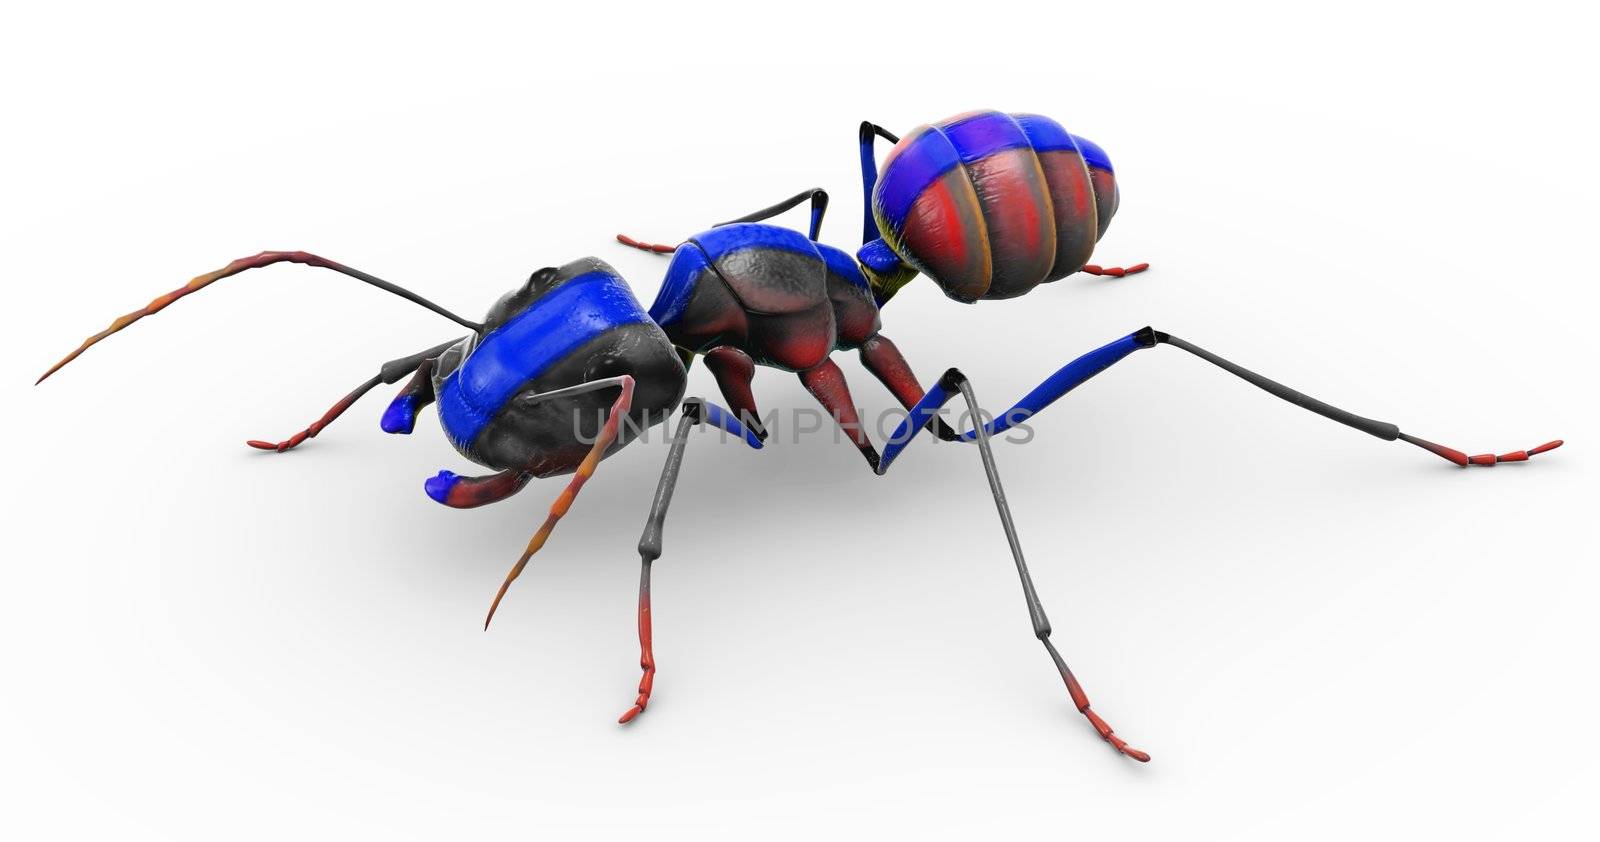 Painted Ant Looking Pretty by LeoBlanchette